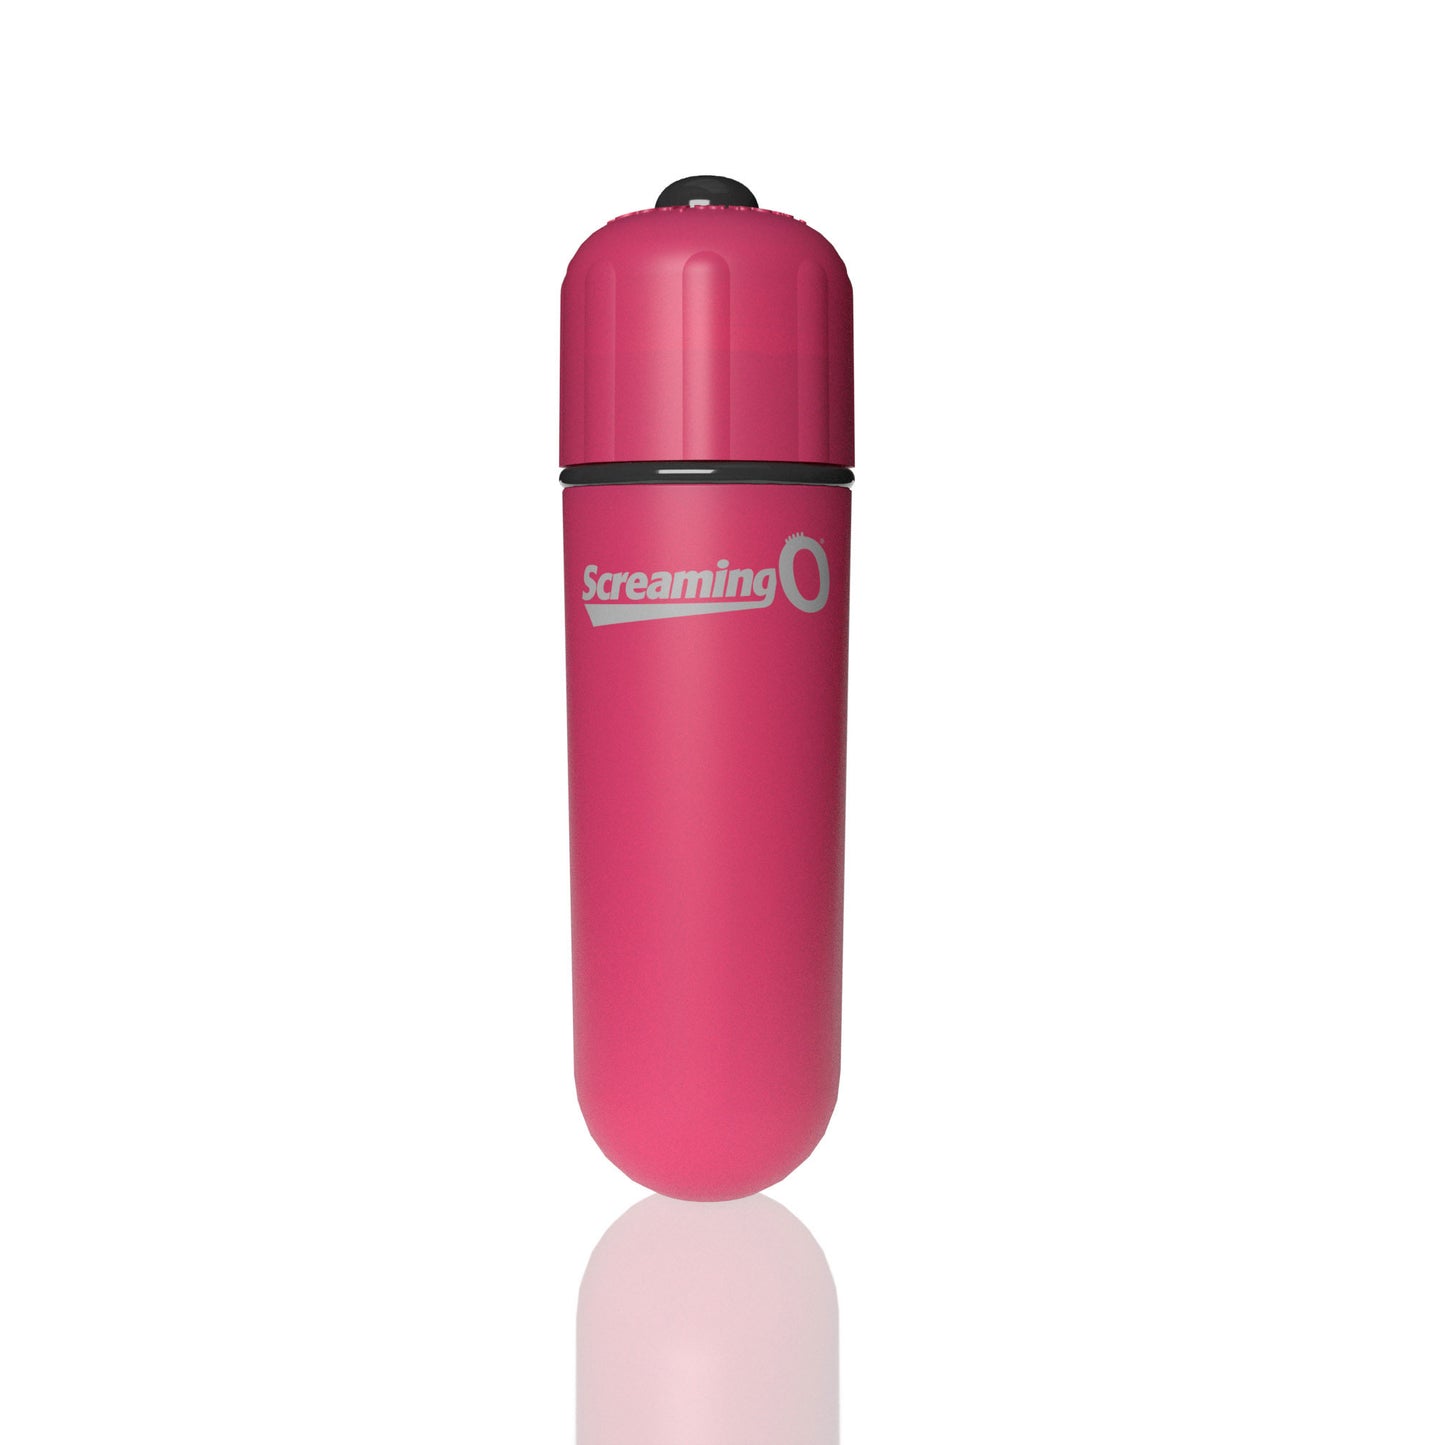 Screaming O 4b - Bullet - Super Powered One Touch  Vibrating Bullet - Collection